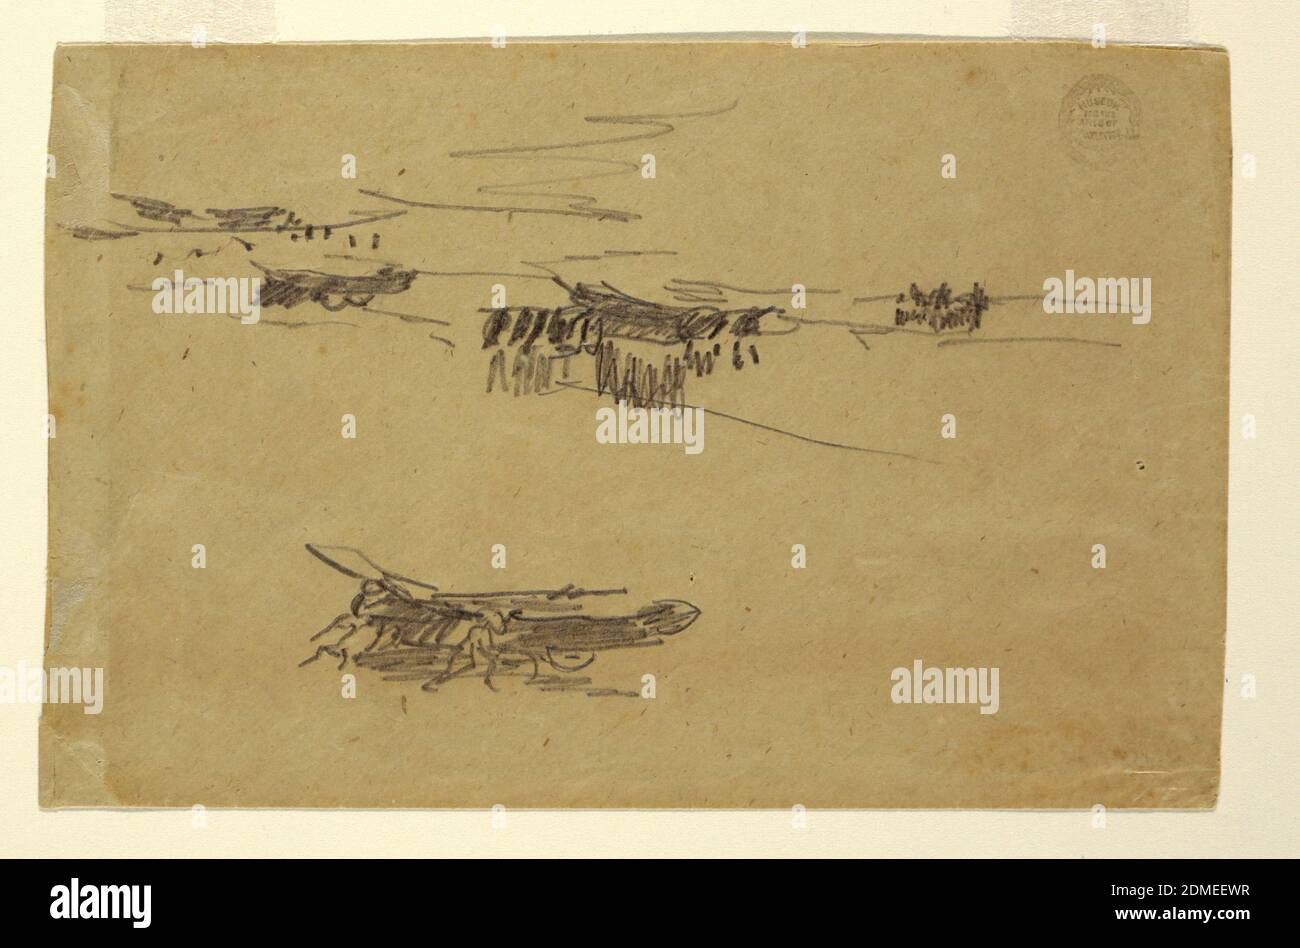 Sketches of Dories on Carriages, Winslow Homer, American, 1836–1910, Graphite on face of a paper envelope, Series of quick horizontal sketches of sailors with boats on carriages., Cullercoats, England, USA, 1881, seascapes, Drawing Stock Photo